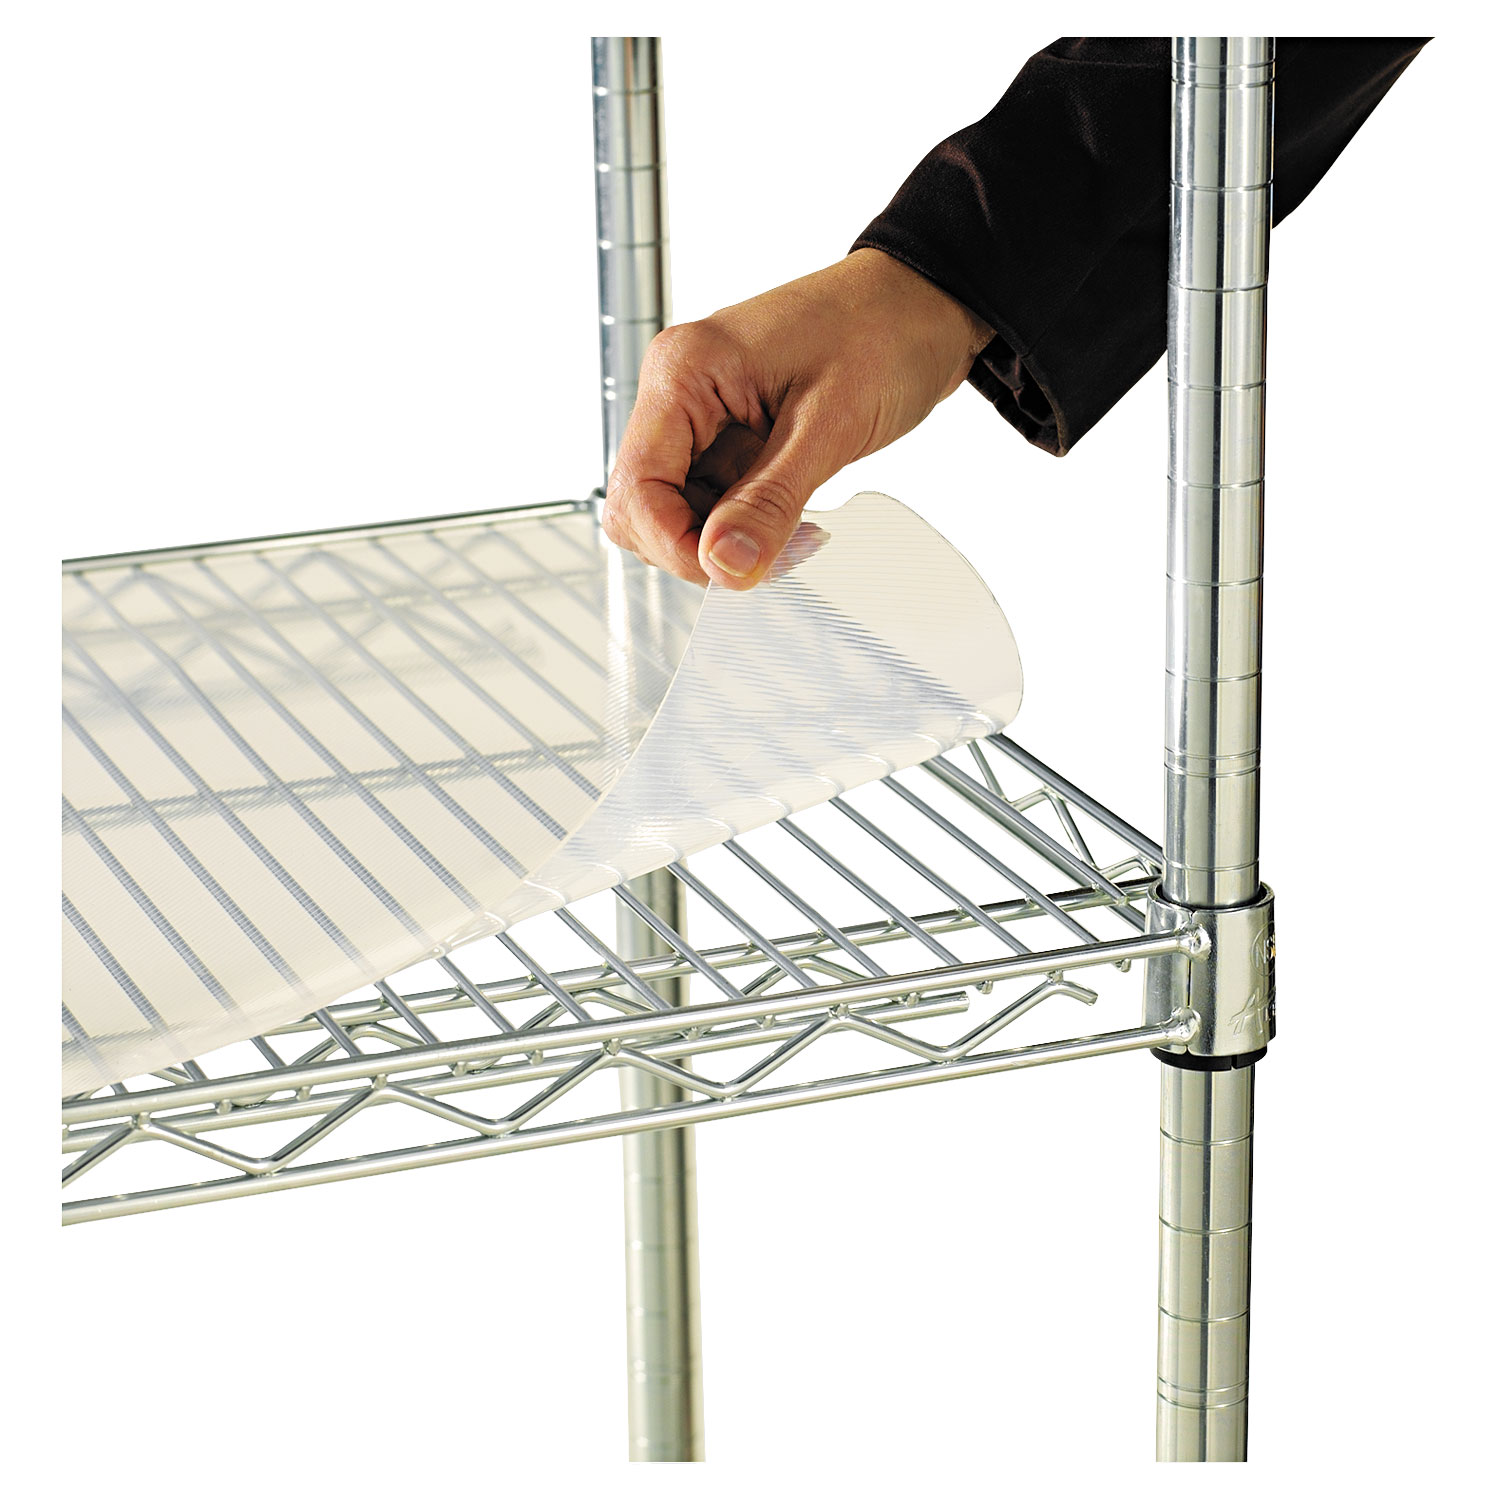  Alera ALESW59SL3618 Shelf Liners For Wire Shelving, Clear Plastic, 36w x 18d, 4/Pack (ALESW59SL3618) 